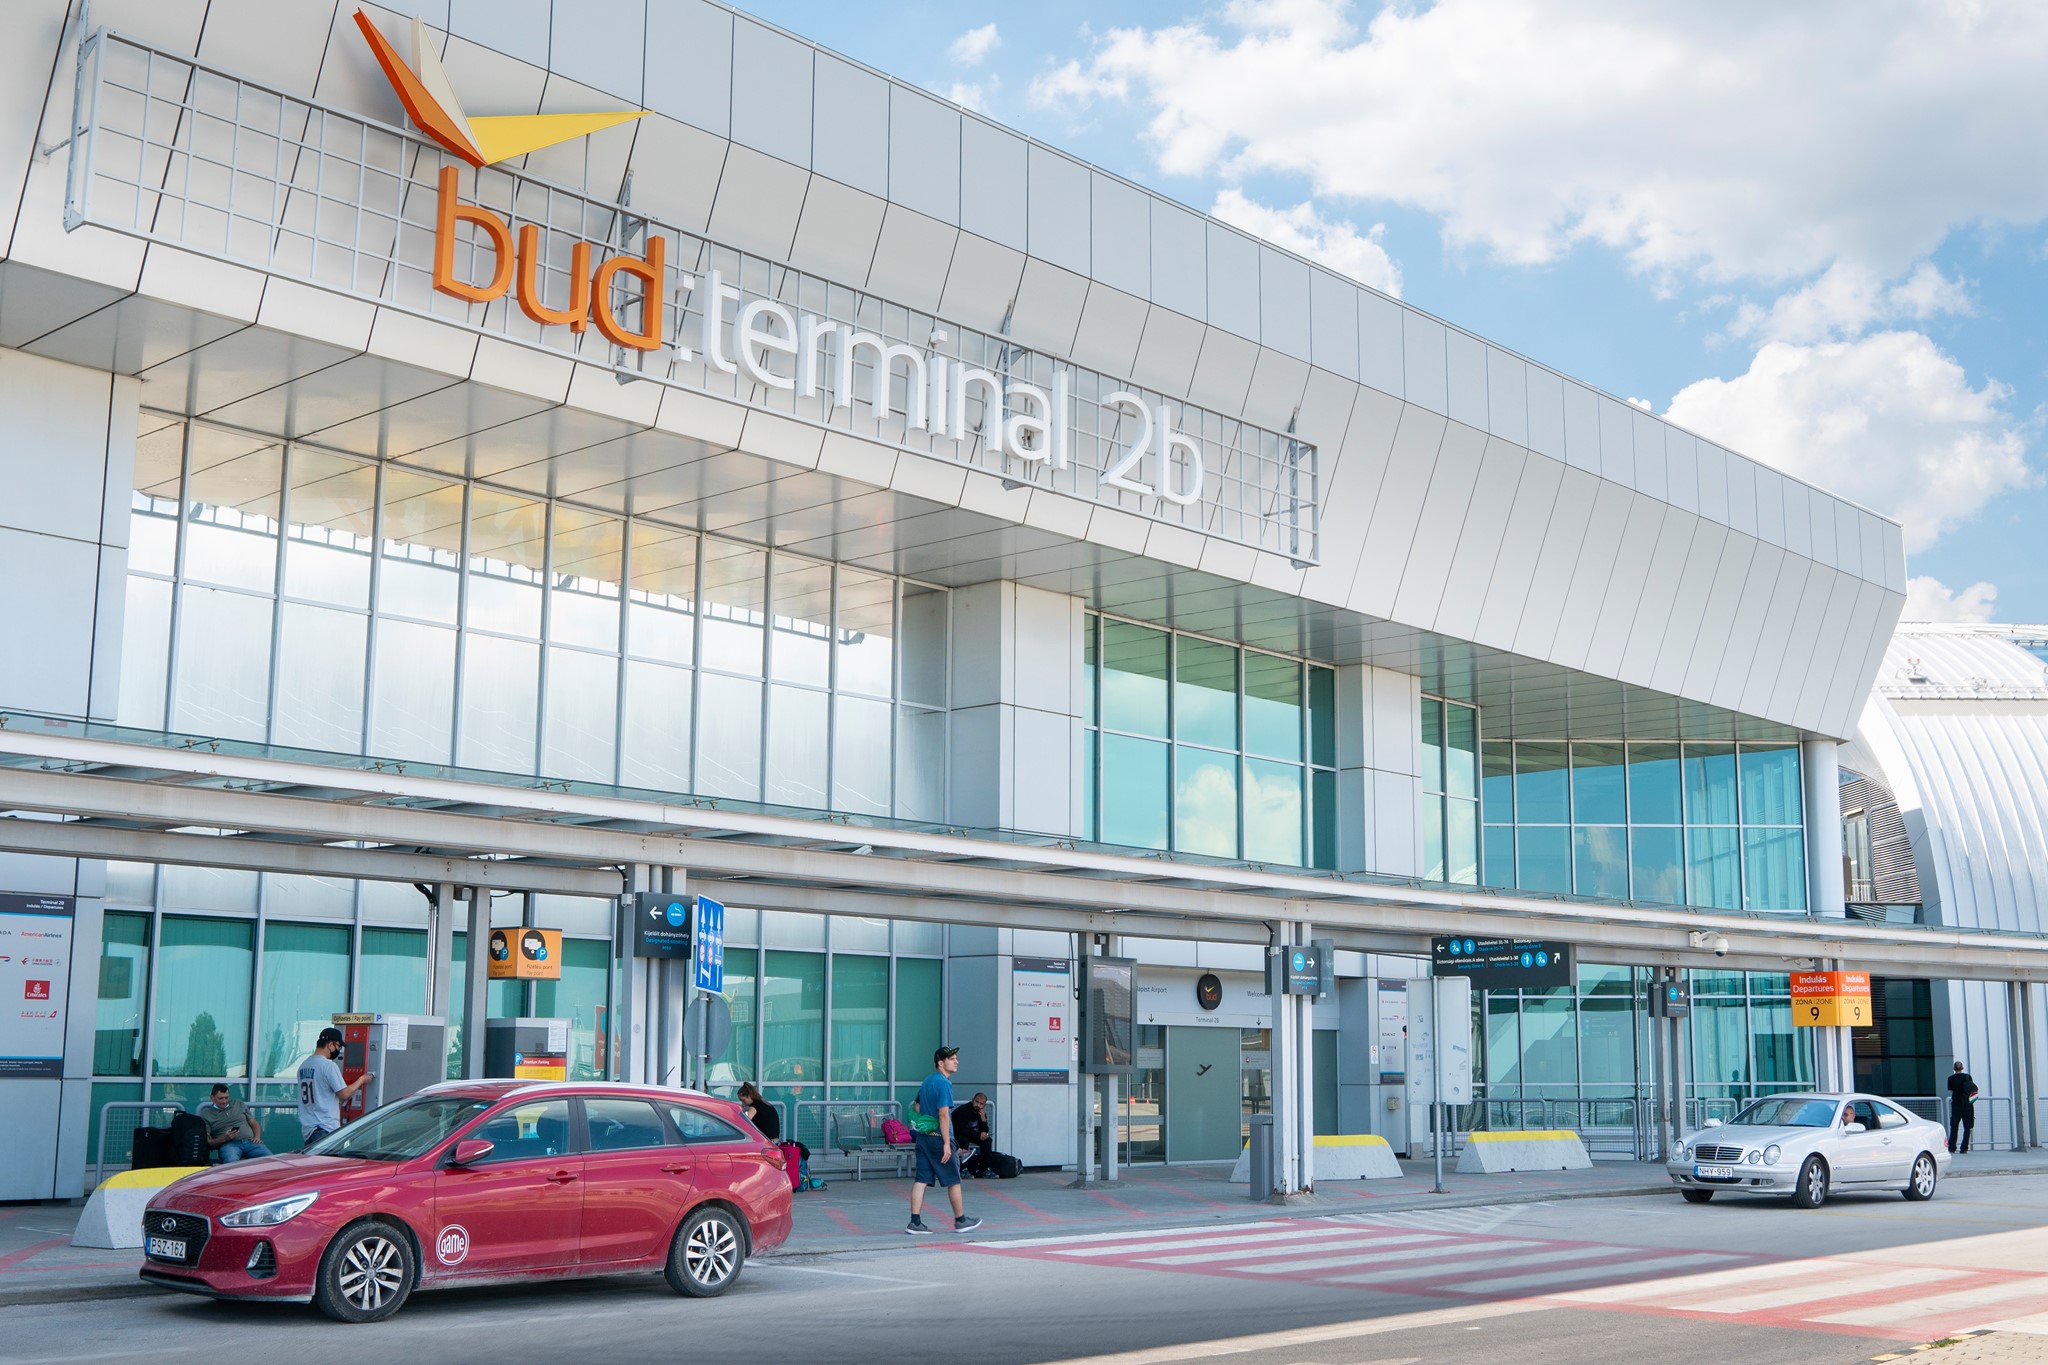 Budapest Airport Report: Euro 167 Million Developments Over 2 Years